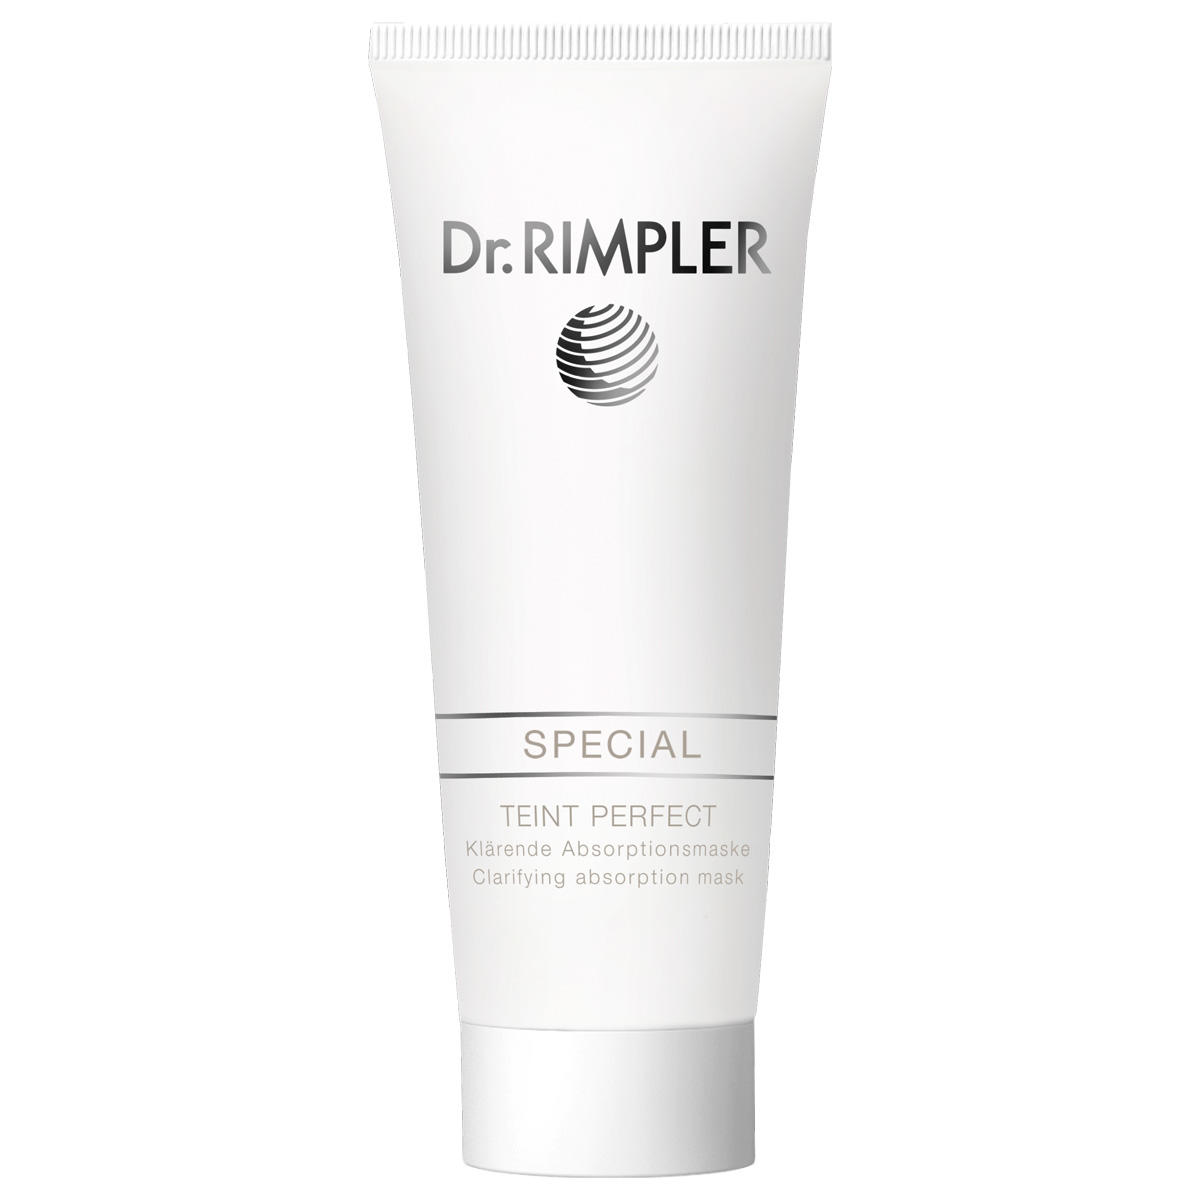 Dr. RIMPLER SPECIAL Teint Perfect 75 ml - 1